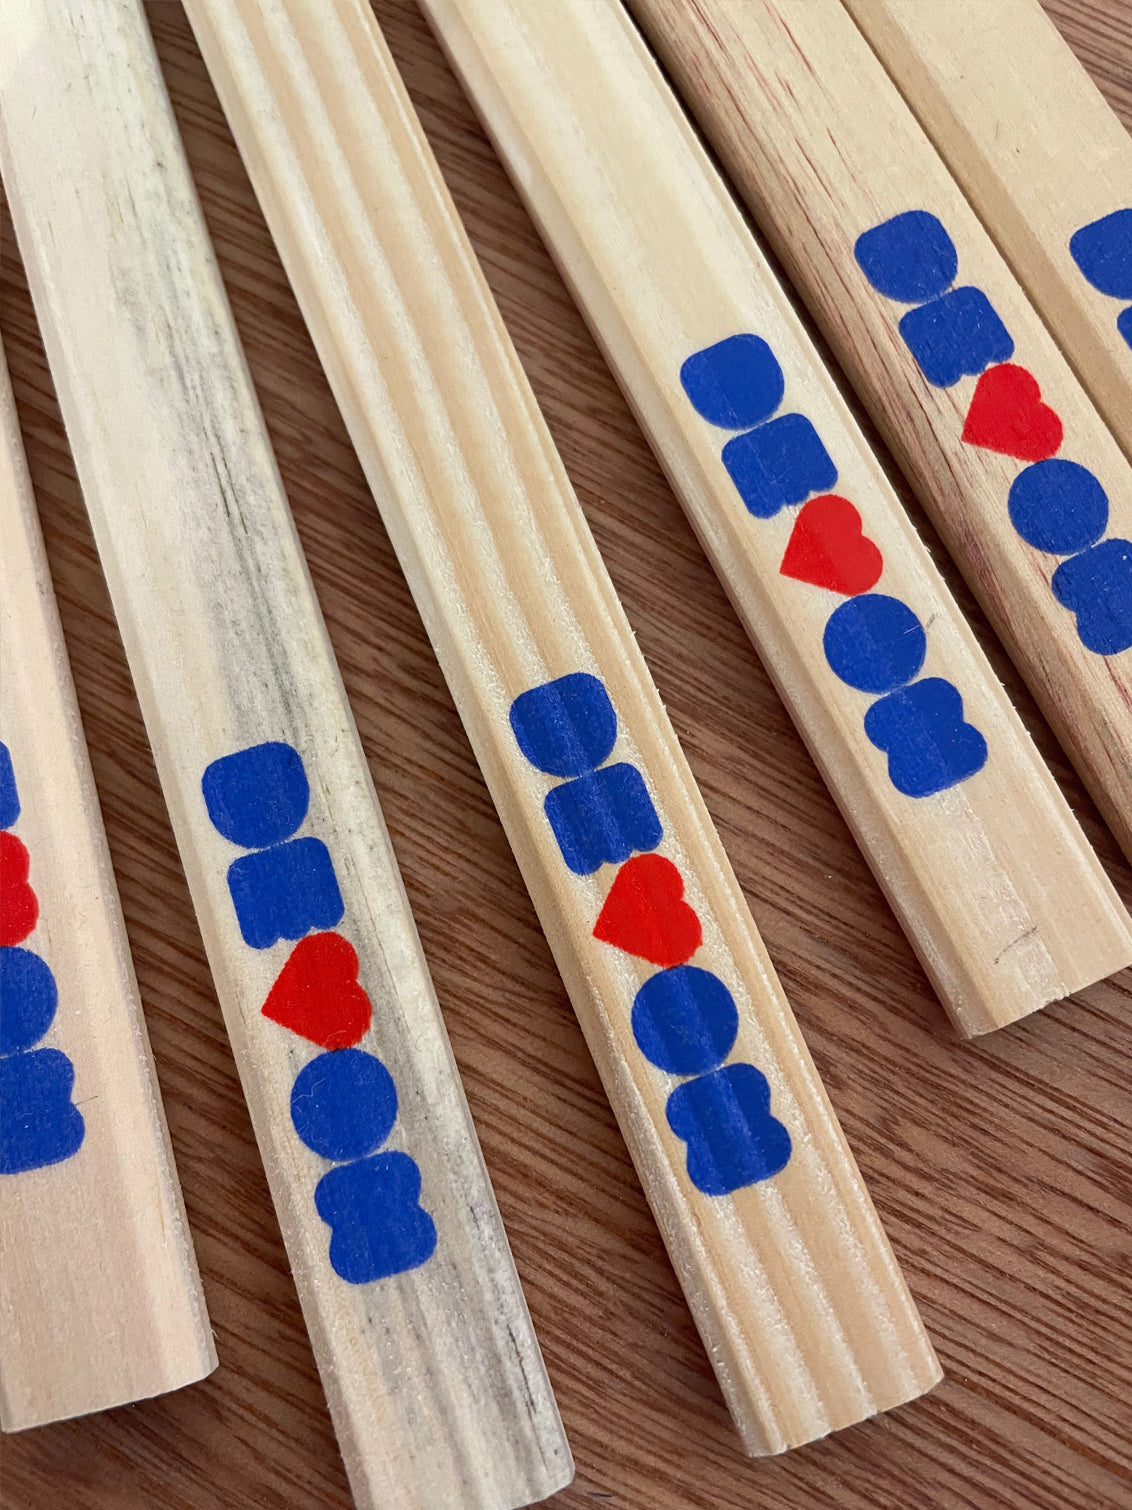 Carpenters pencils lying on a wooden table top, unsharpened. The printed word of Devon, with the V as a heart and in royal blue and red is shown across all of them.